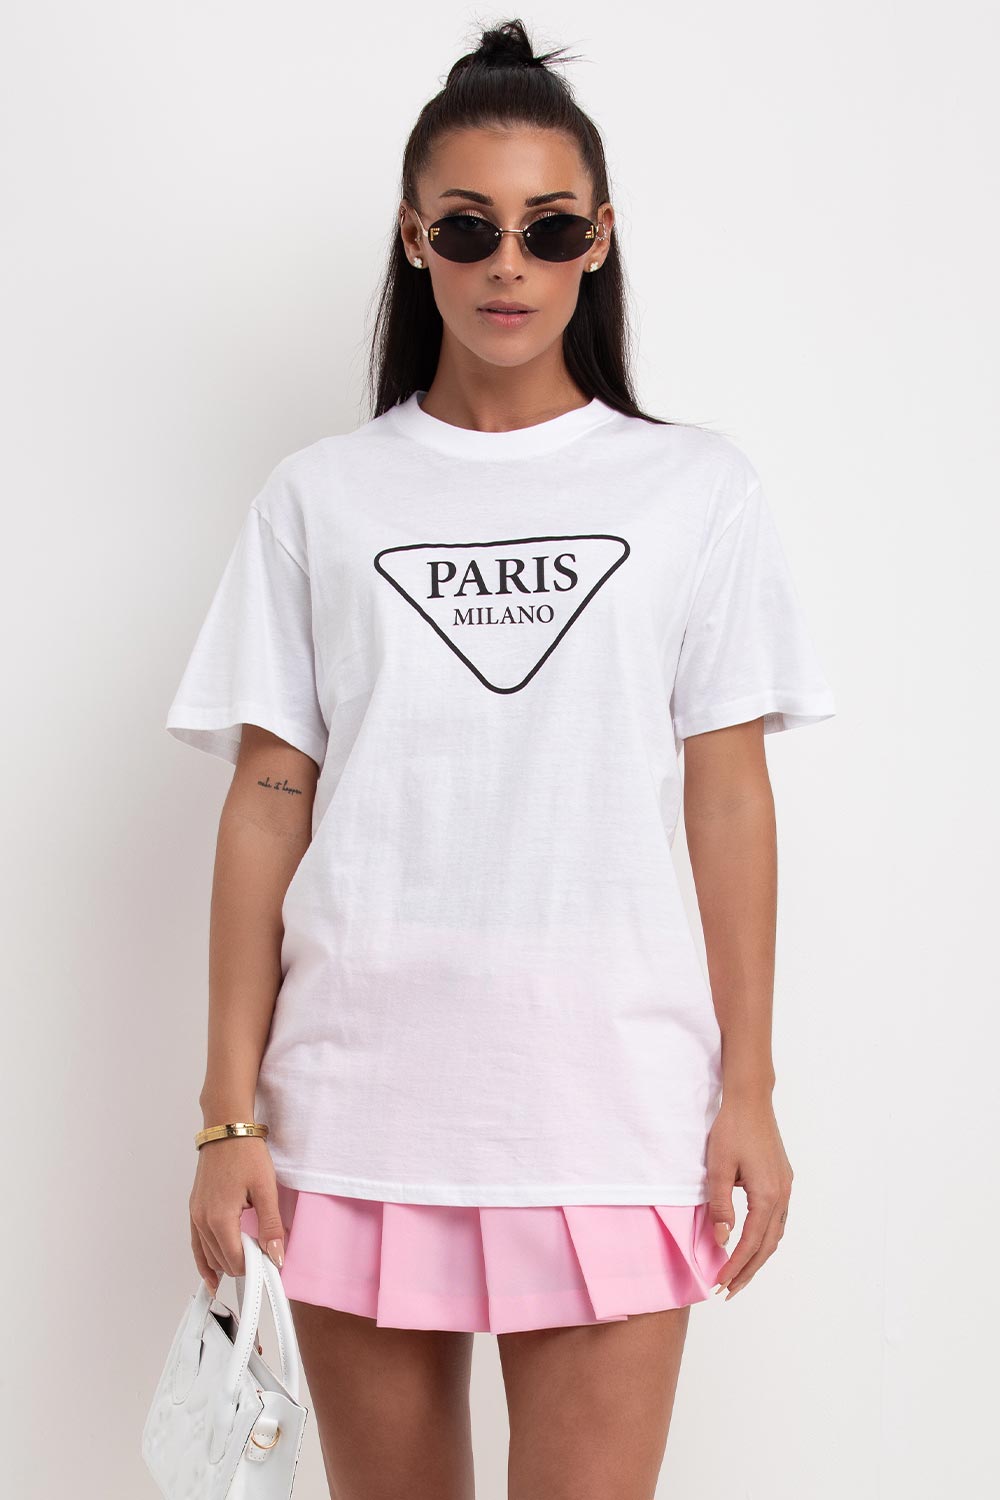 womens white t shirt with paris milano print casual summer outfit